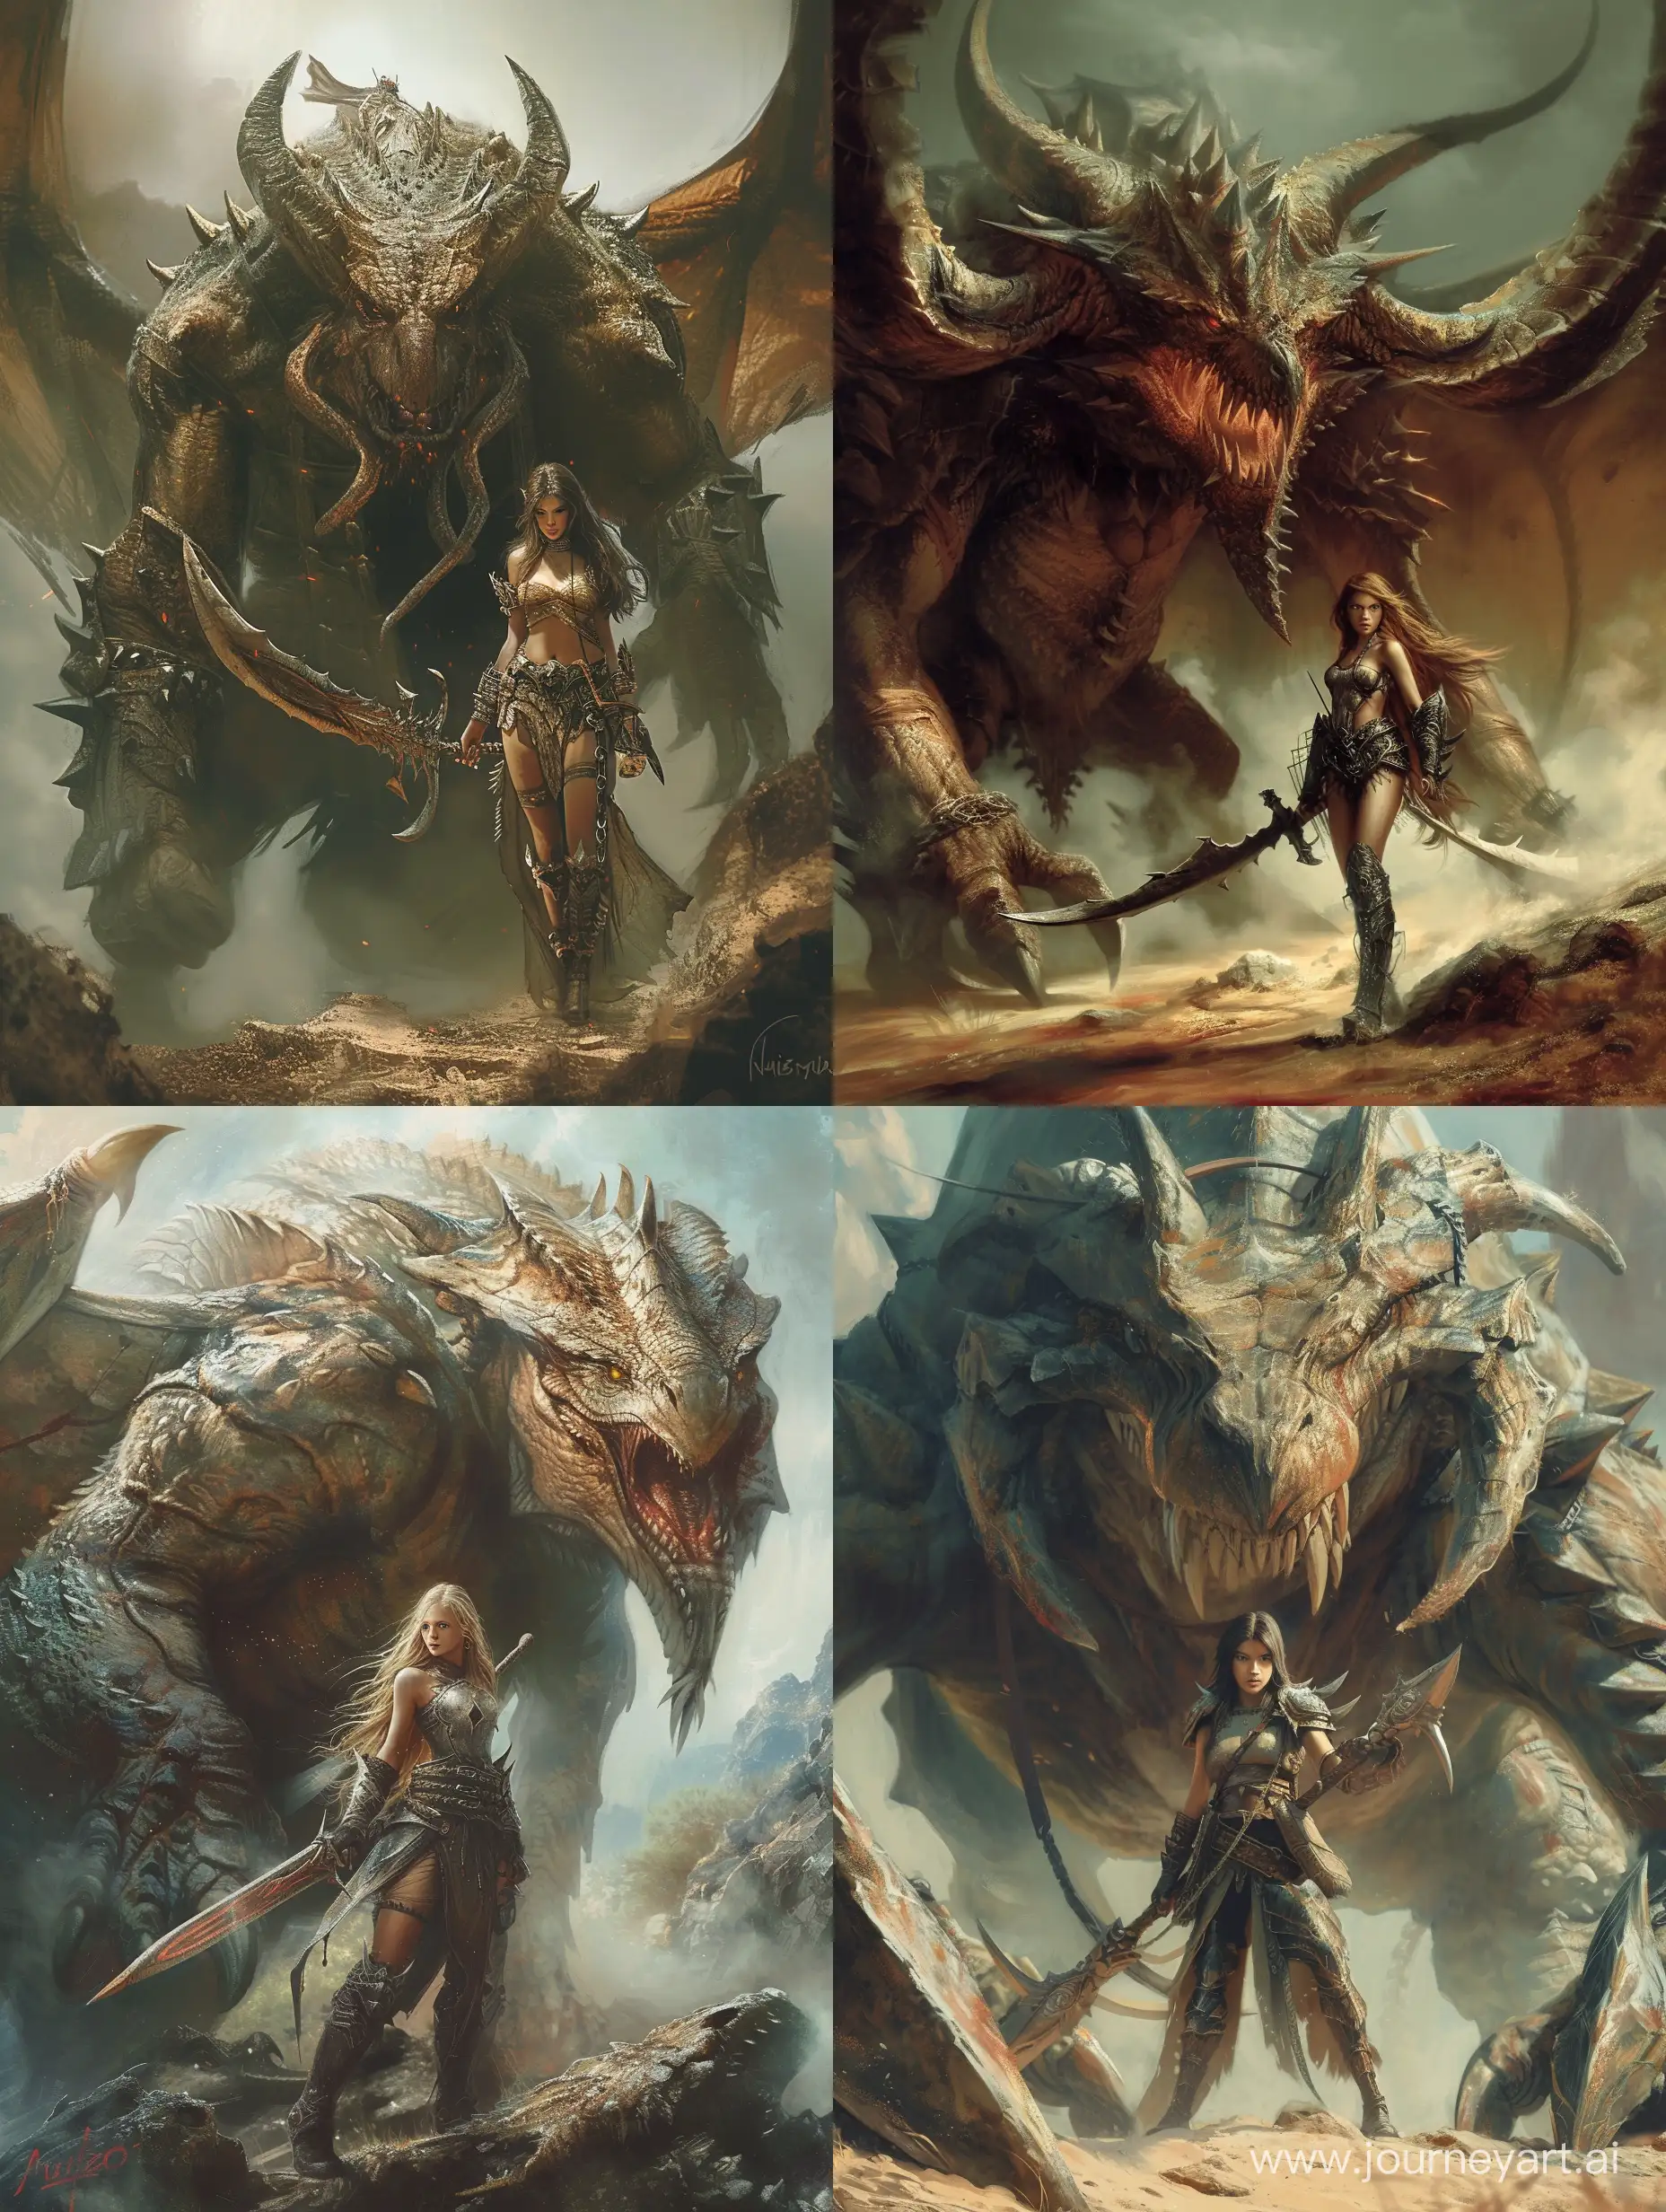 Epic-Female-Warrior-and-Enormous-Wicked-Creature-in-Luis-Royoinspired-Fantasy-Art